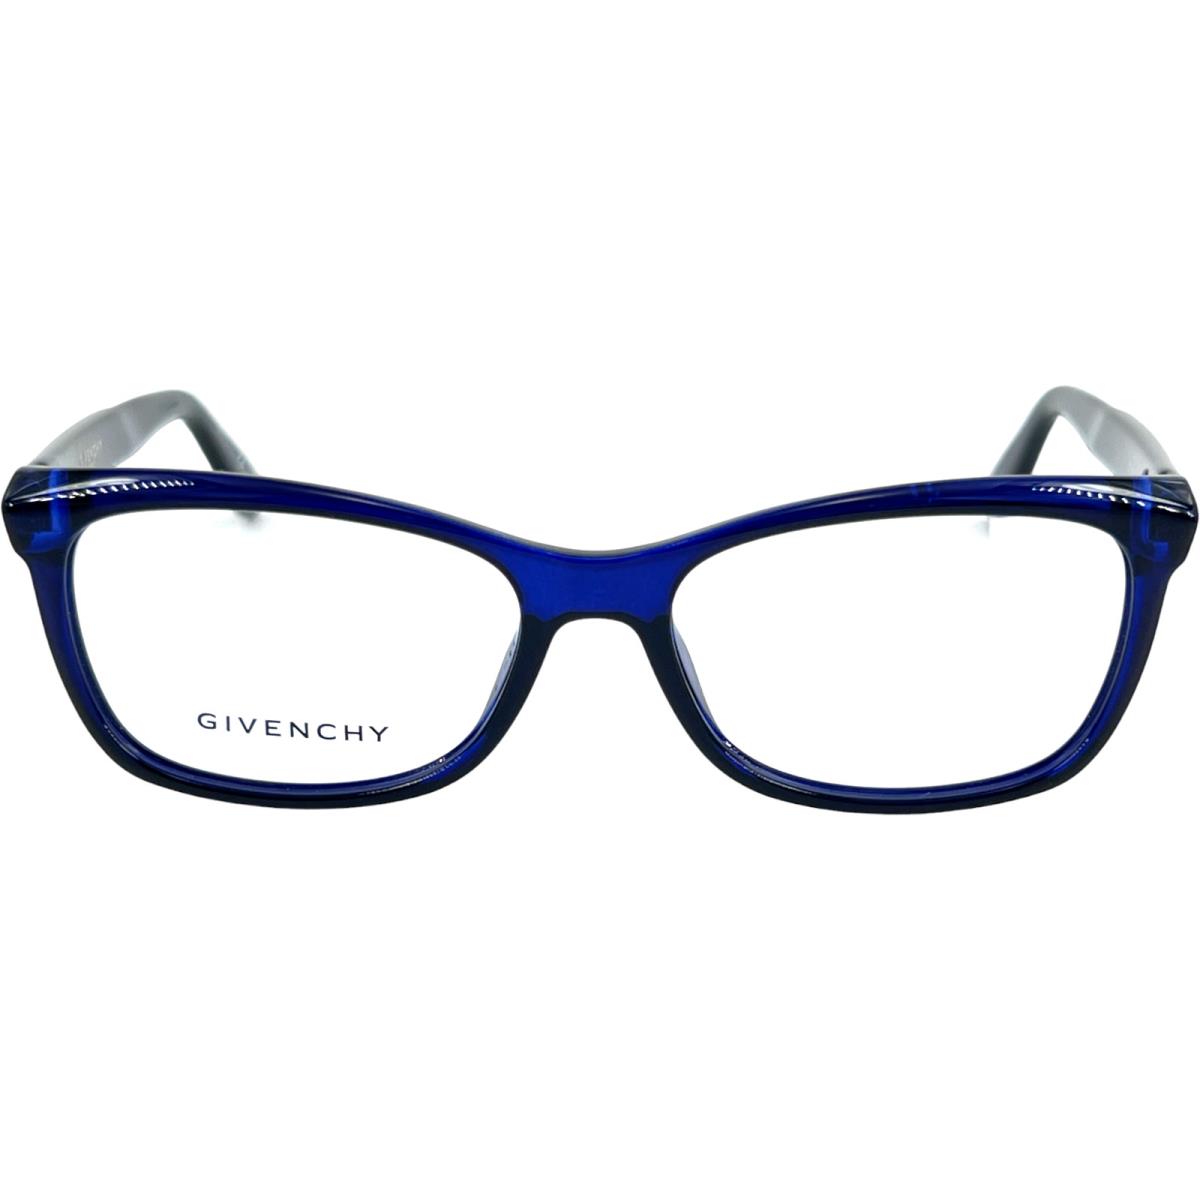 Givenchy GV0058 Womens Plastic Eyeglass Frame 0PJP Blue 52-16 Italy W/case